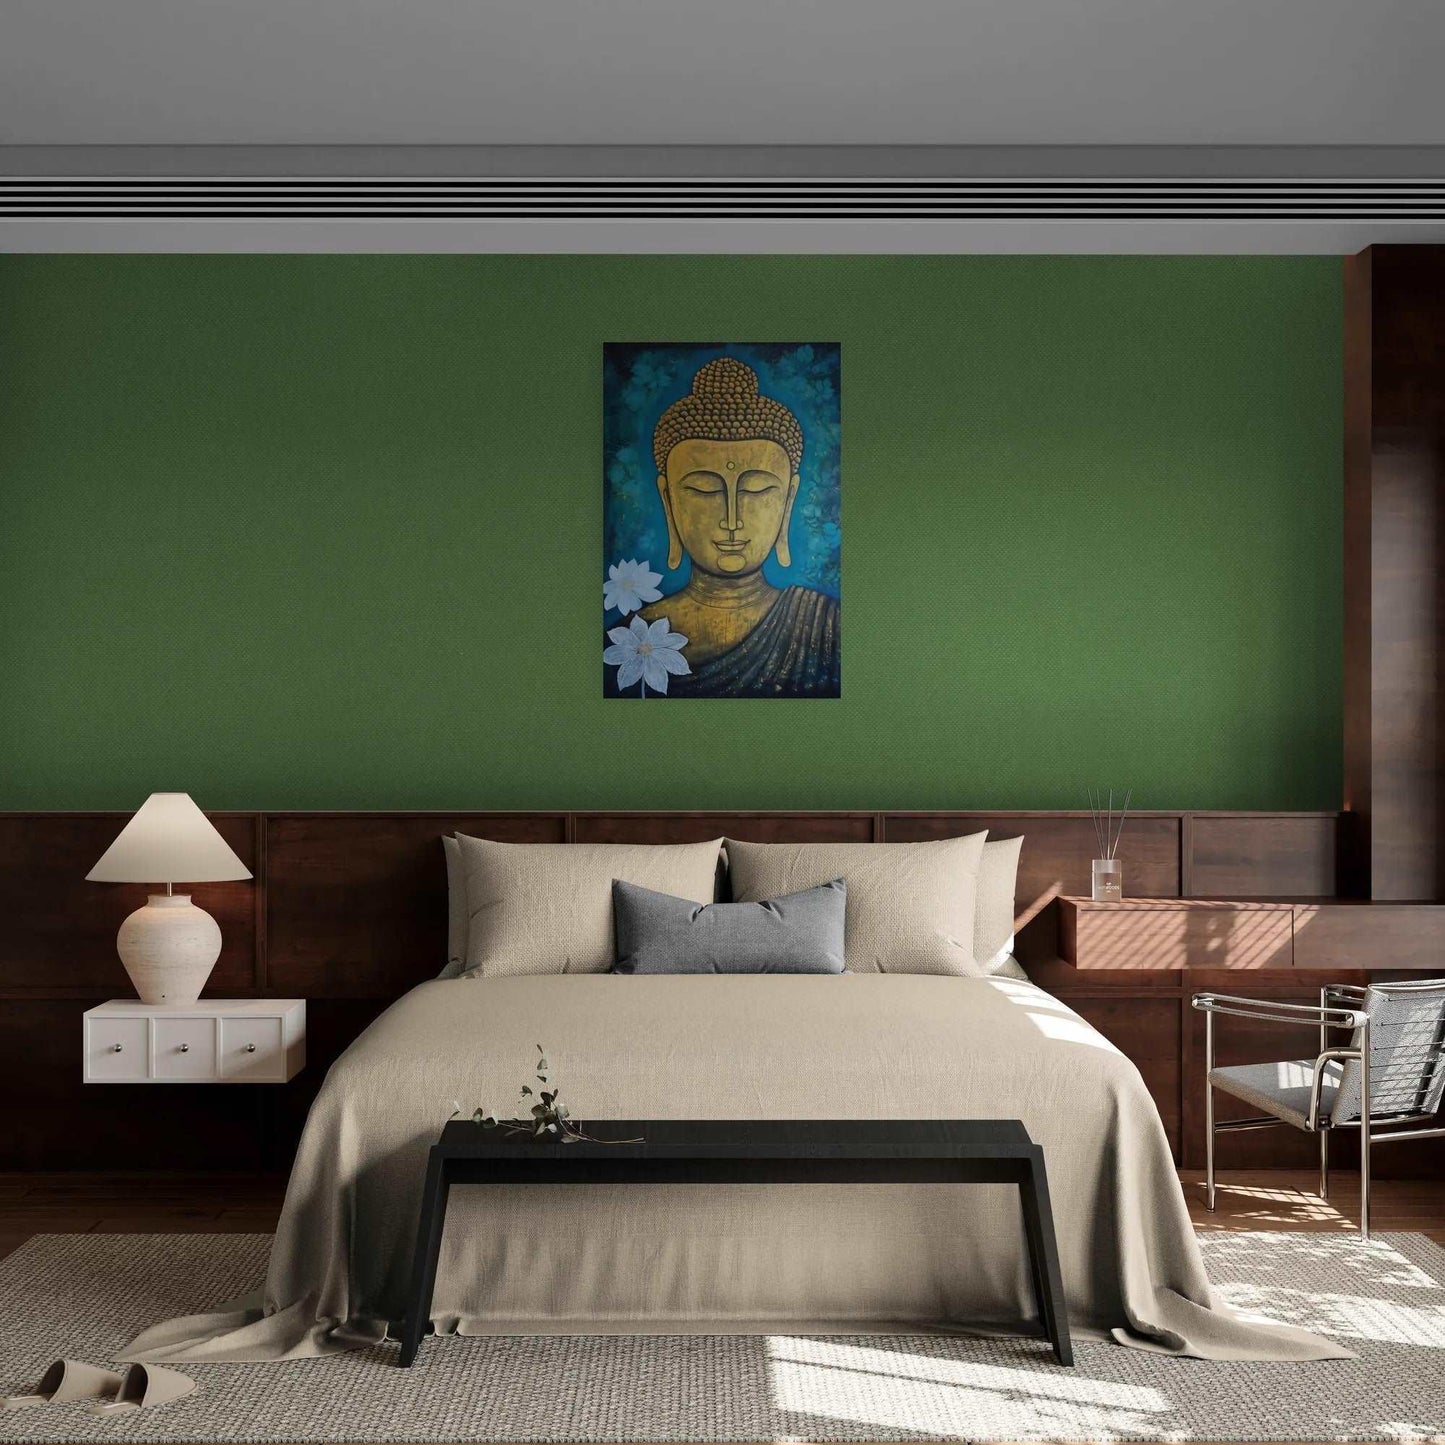 A serene Buddha painting with golden hues and teal flowers, enhancing a green bedroom wall with a bed and wooden furnishings.